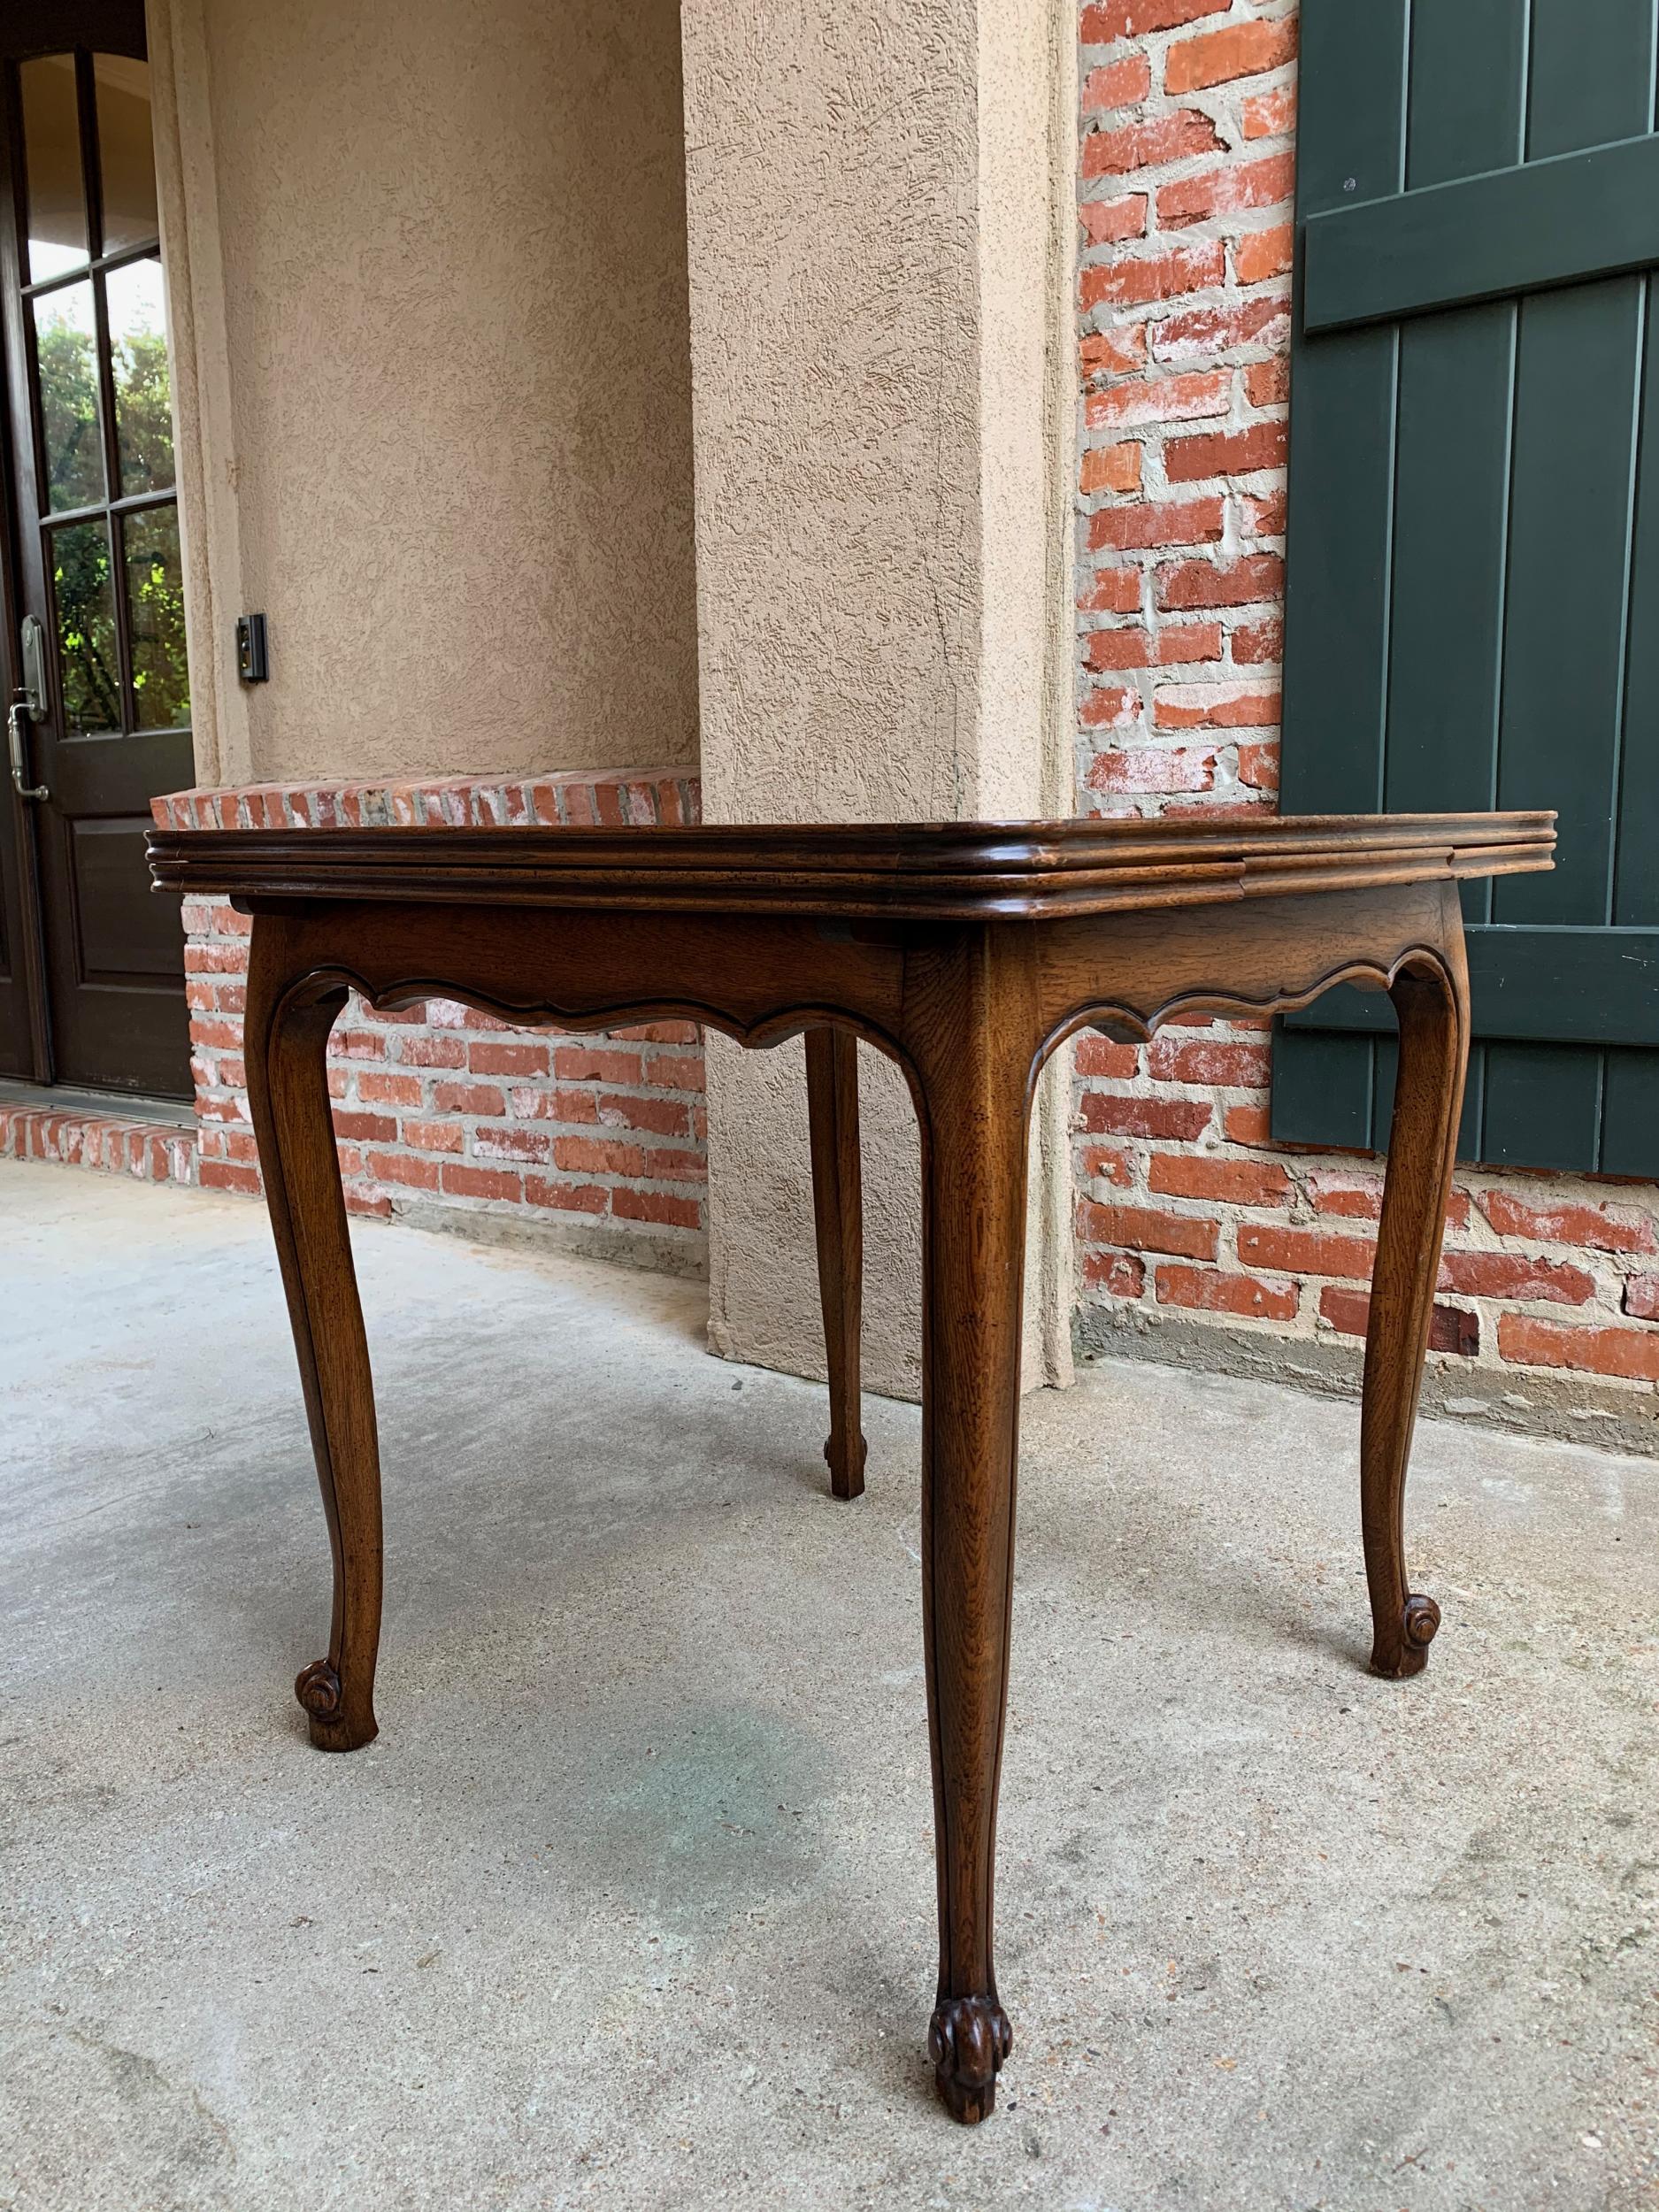 20th century French country oak draw-leaf square table petite Louis XV style

~Direct from France~
~Lovely vintage French draw-leaf table in a versatile small size, and expandable to 50” length when needed!~
~Square table tops have French